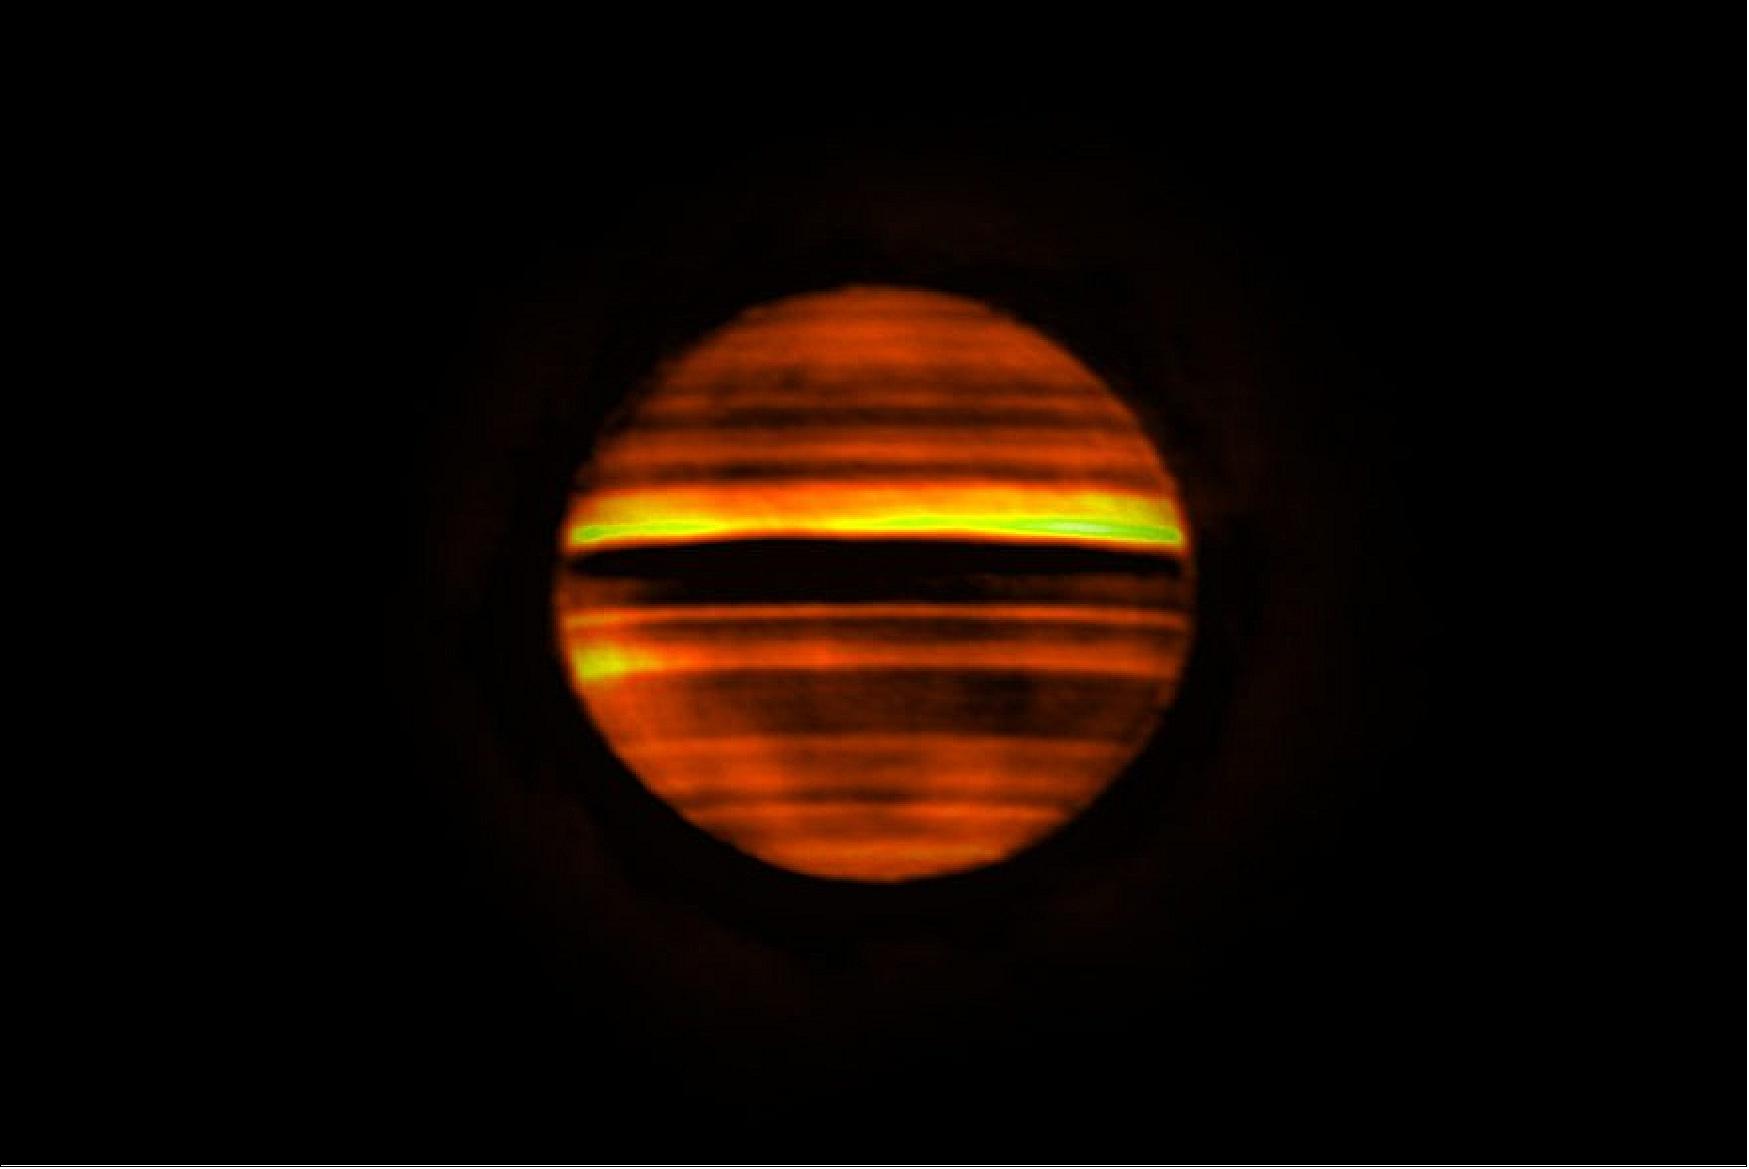 Figure 87: Radio image of Jupiter made with ALMA. Bright bands indicate high temperatures and dark bands low temperatures. The dark bands correspond to the zones on Jupiter, which are often white at visible wavelengths. The bright bands correspond to the brown belts on the planet. This image contains over 10 hours of data, so fine details are smeared by the planet’s rotation (image credit: ALMA (ESO/NAOJ/NRAO), I. de Pater et al.; NRAO/AUI NSF, S. Dagnello)